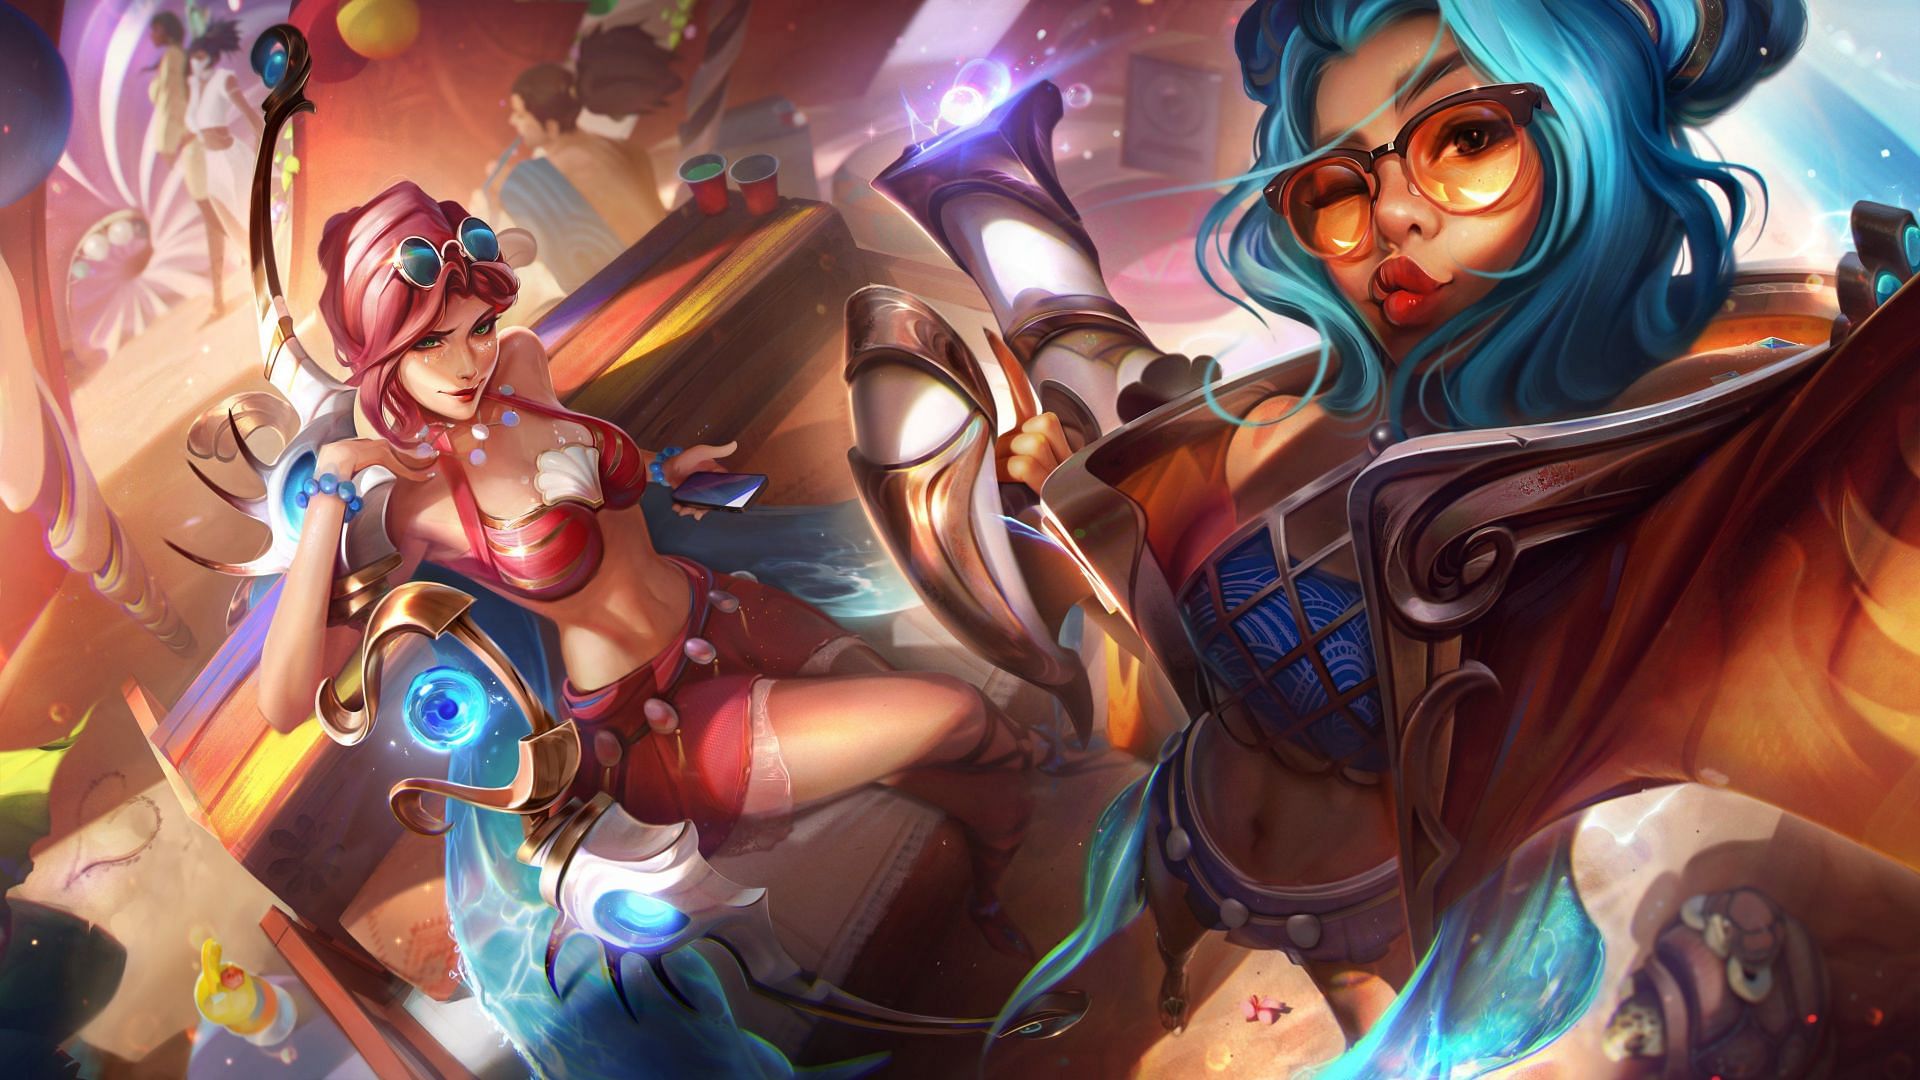 Ocean Song Ashe (left) and Zeri (right) (Image via Riot Games)